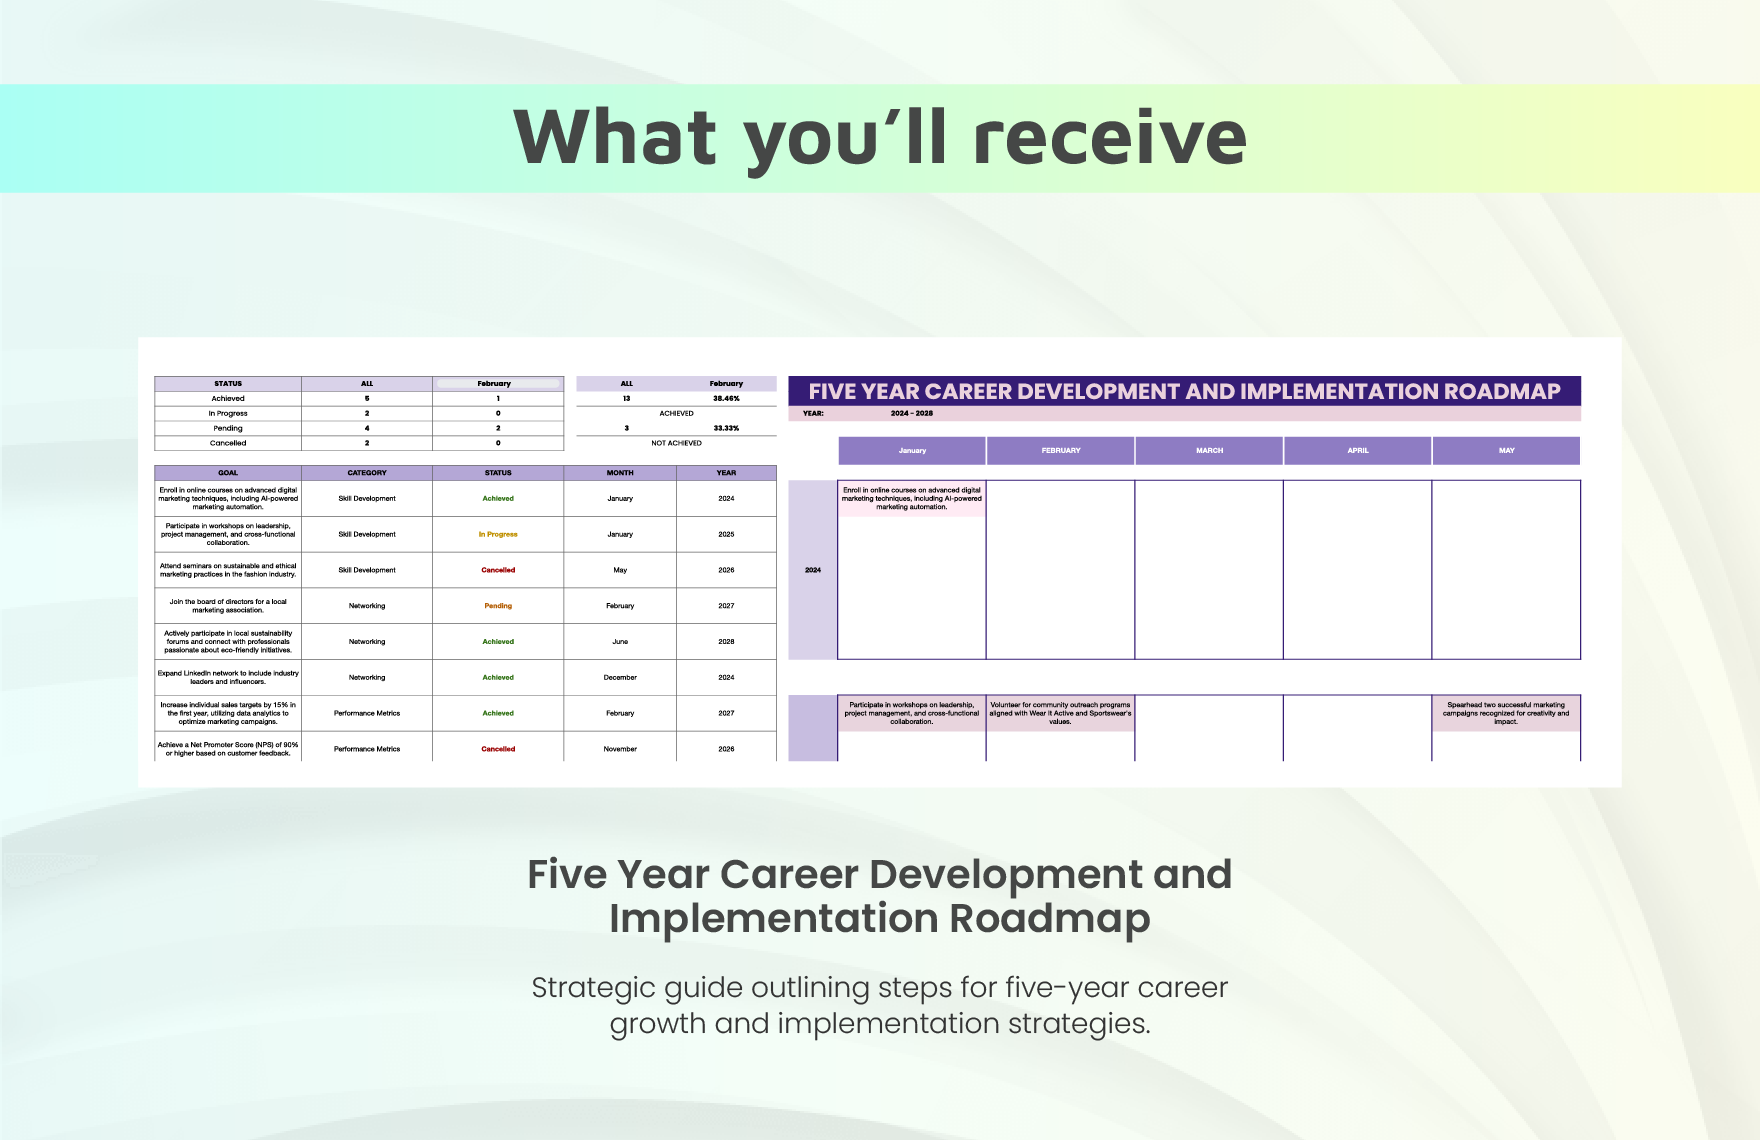 Five Year Career Development and Implementation Roadmap Template